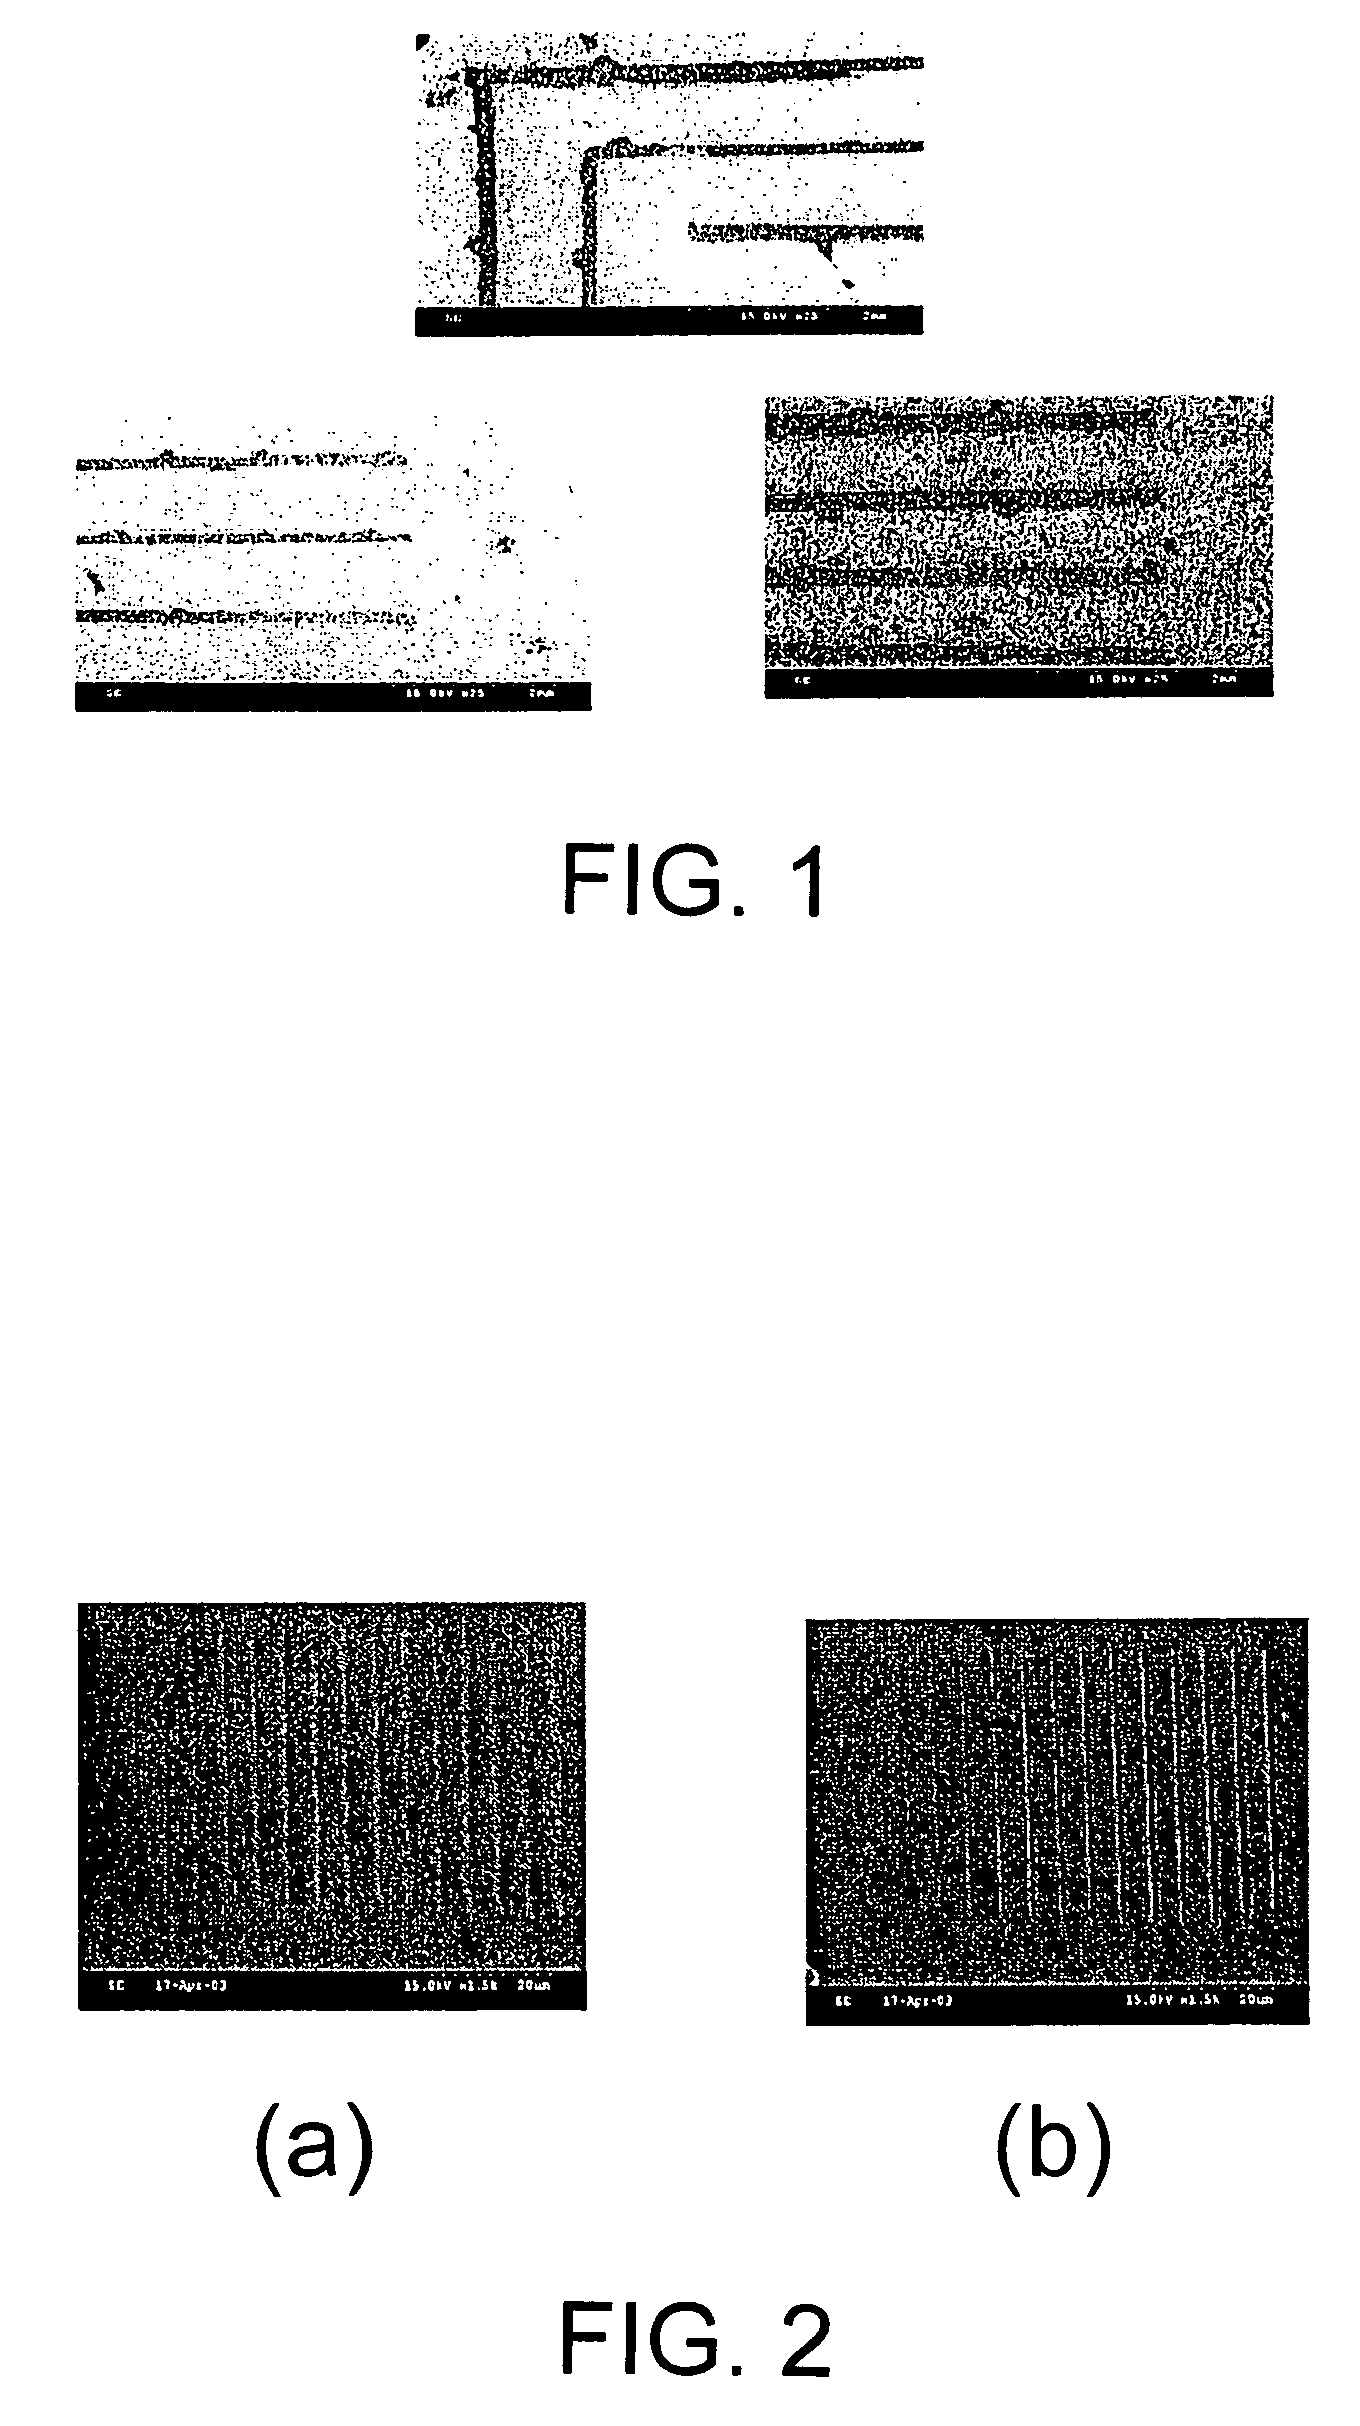 Norbornene-type monomers and polymers containing pendent lactone or sultone groups